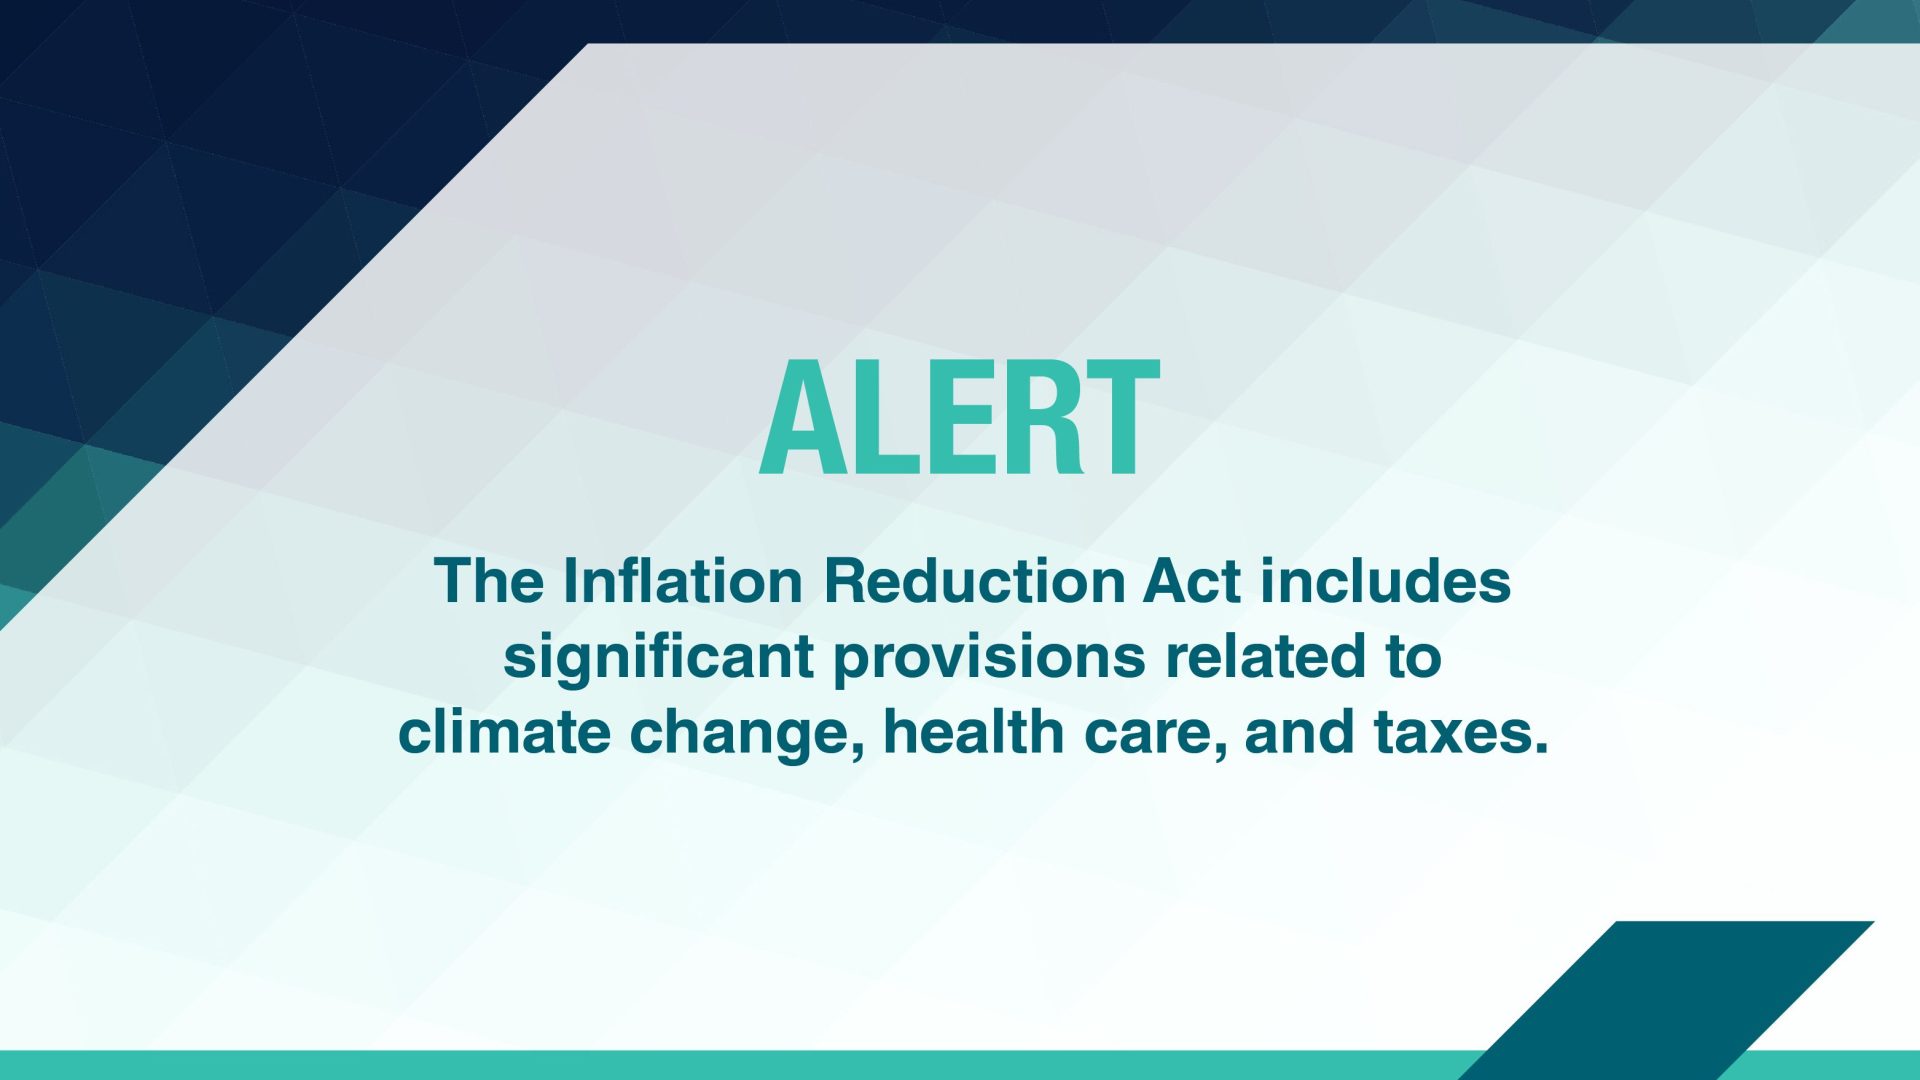 The Inflation Reduction Act includes wide-ranging tax provisions